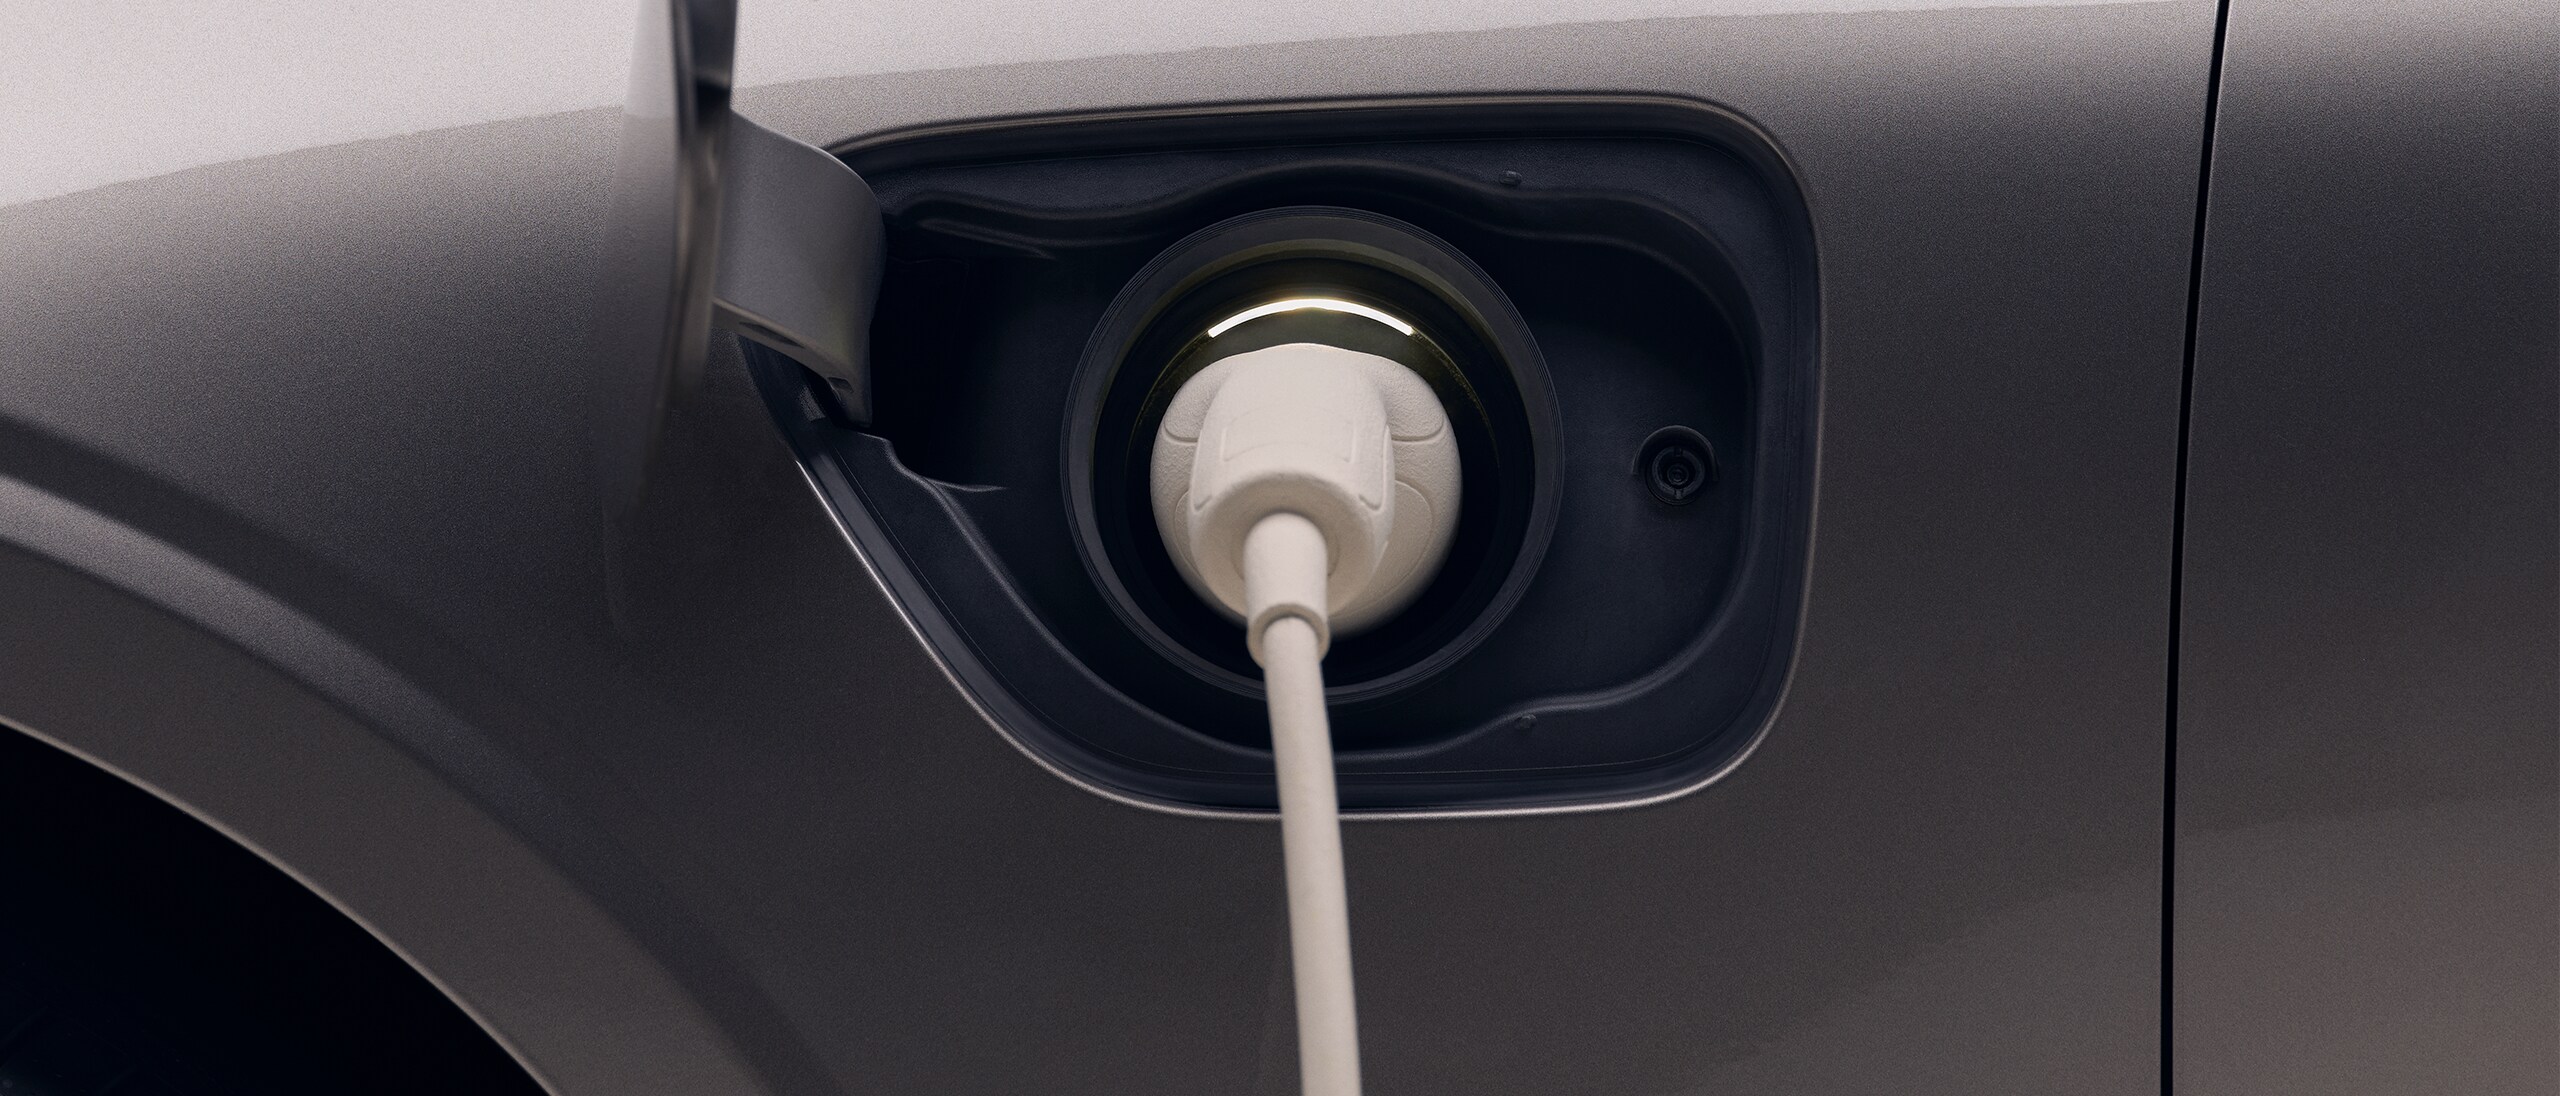 Closeup of the front left quarter of a new dark grey Volvo electric car, with a white charging cable plugged in to the car's charging port.